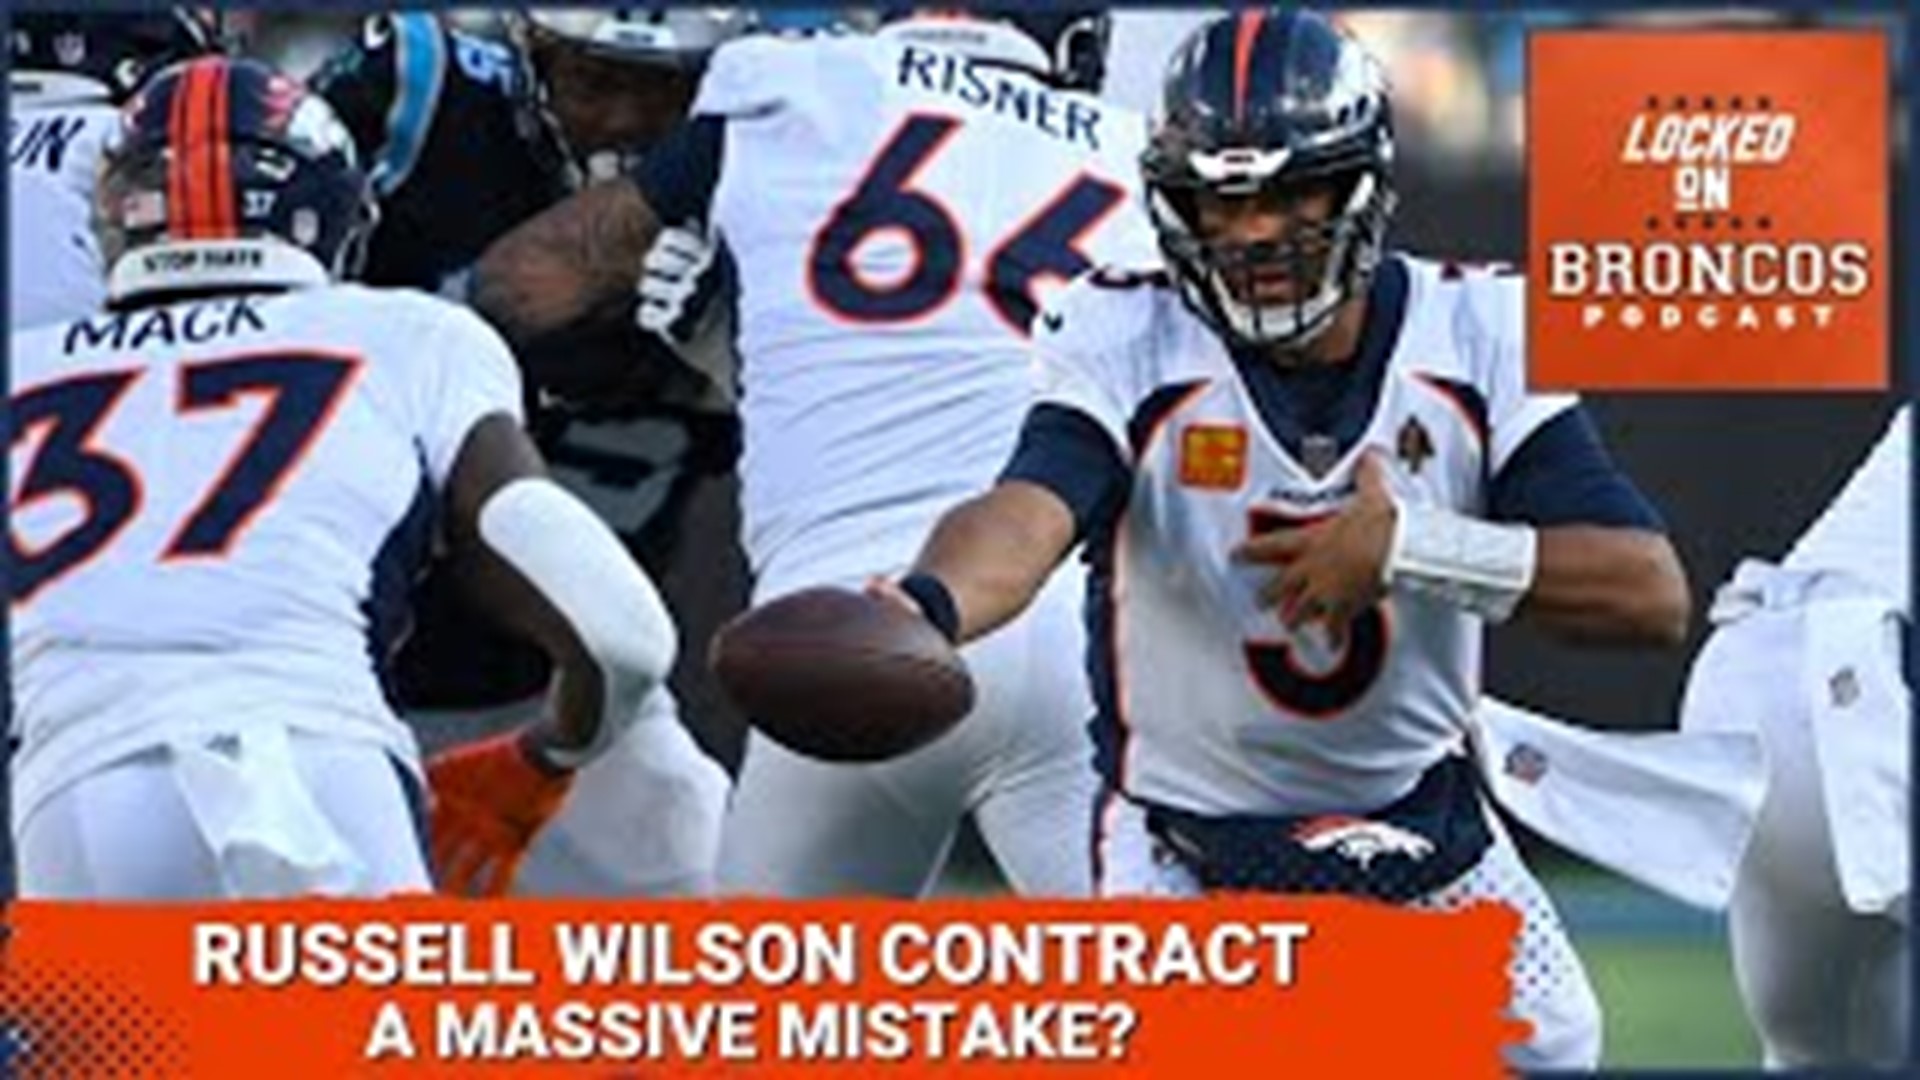 The off-season excitement has faded as the Broncos offense has turned out to be a massive disappointment this season.